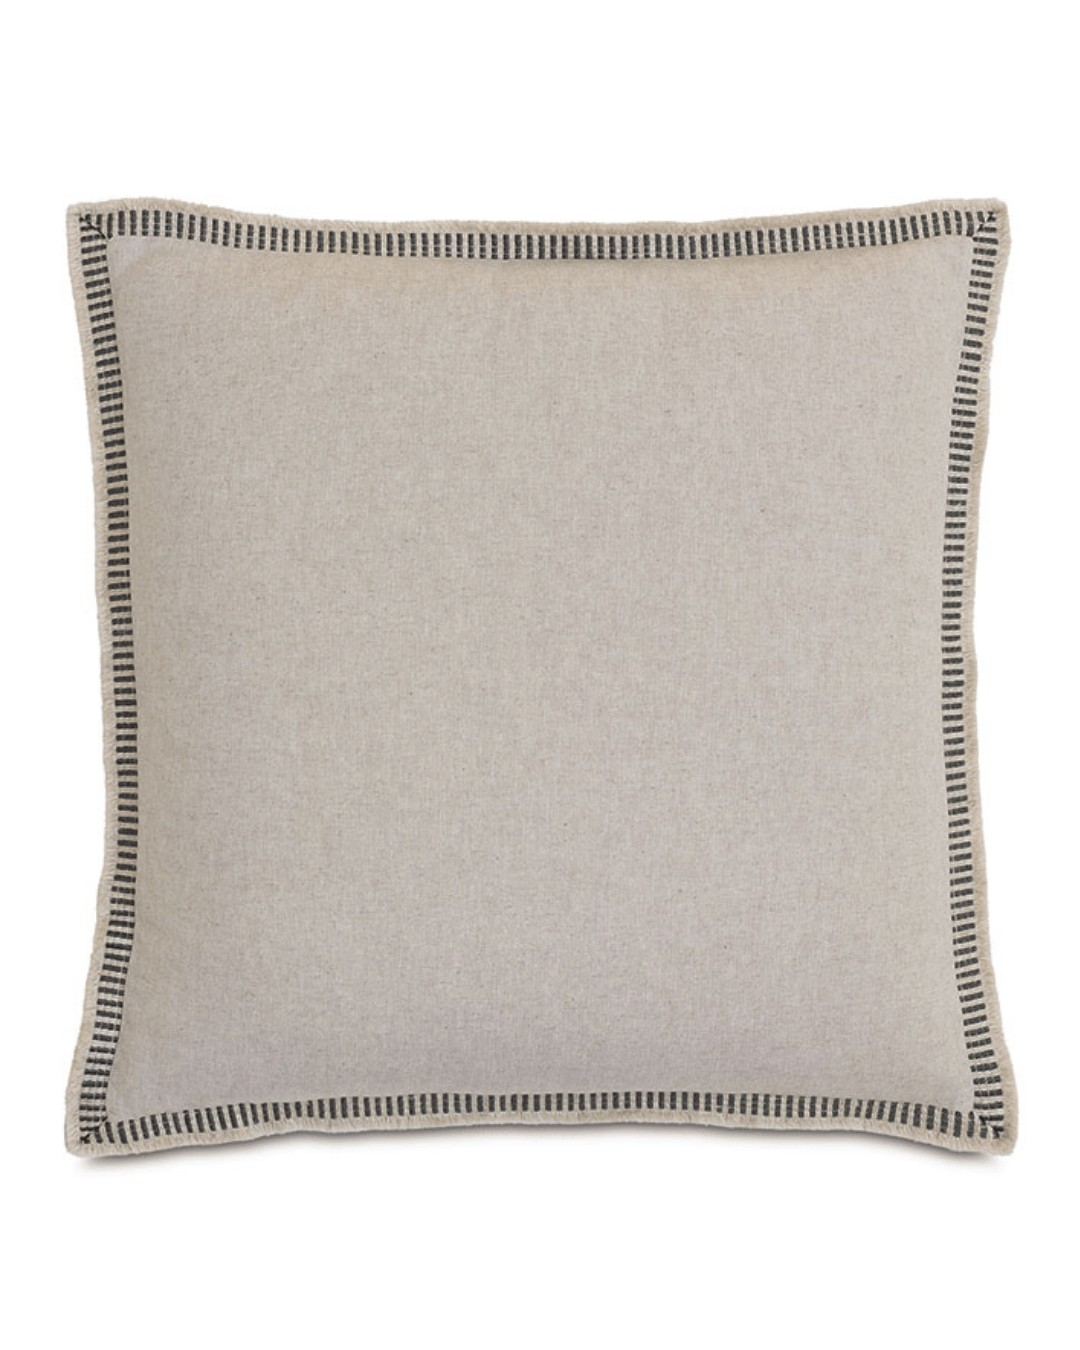 A Moa Textured Border Petit pillow by Eastern Accents, with a black and white piped edge, displayed on a plain, light background in a Scottsdale Arizona Bungalow.